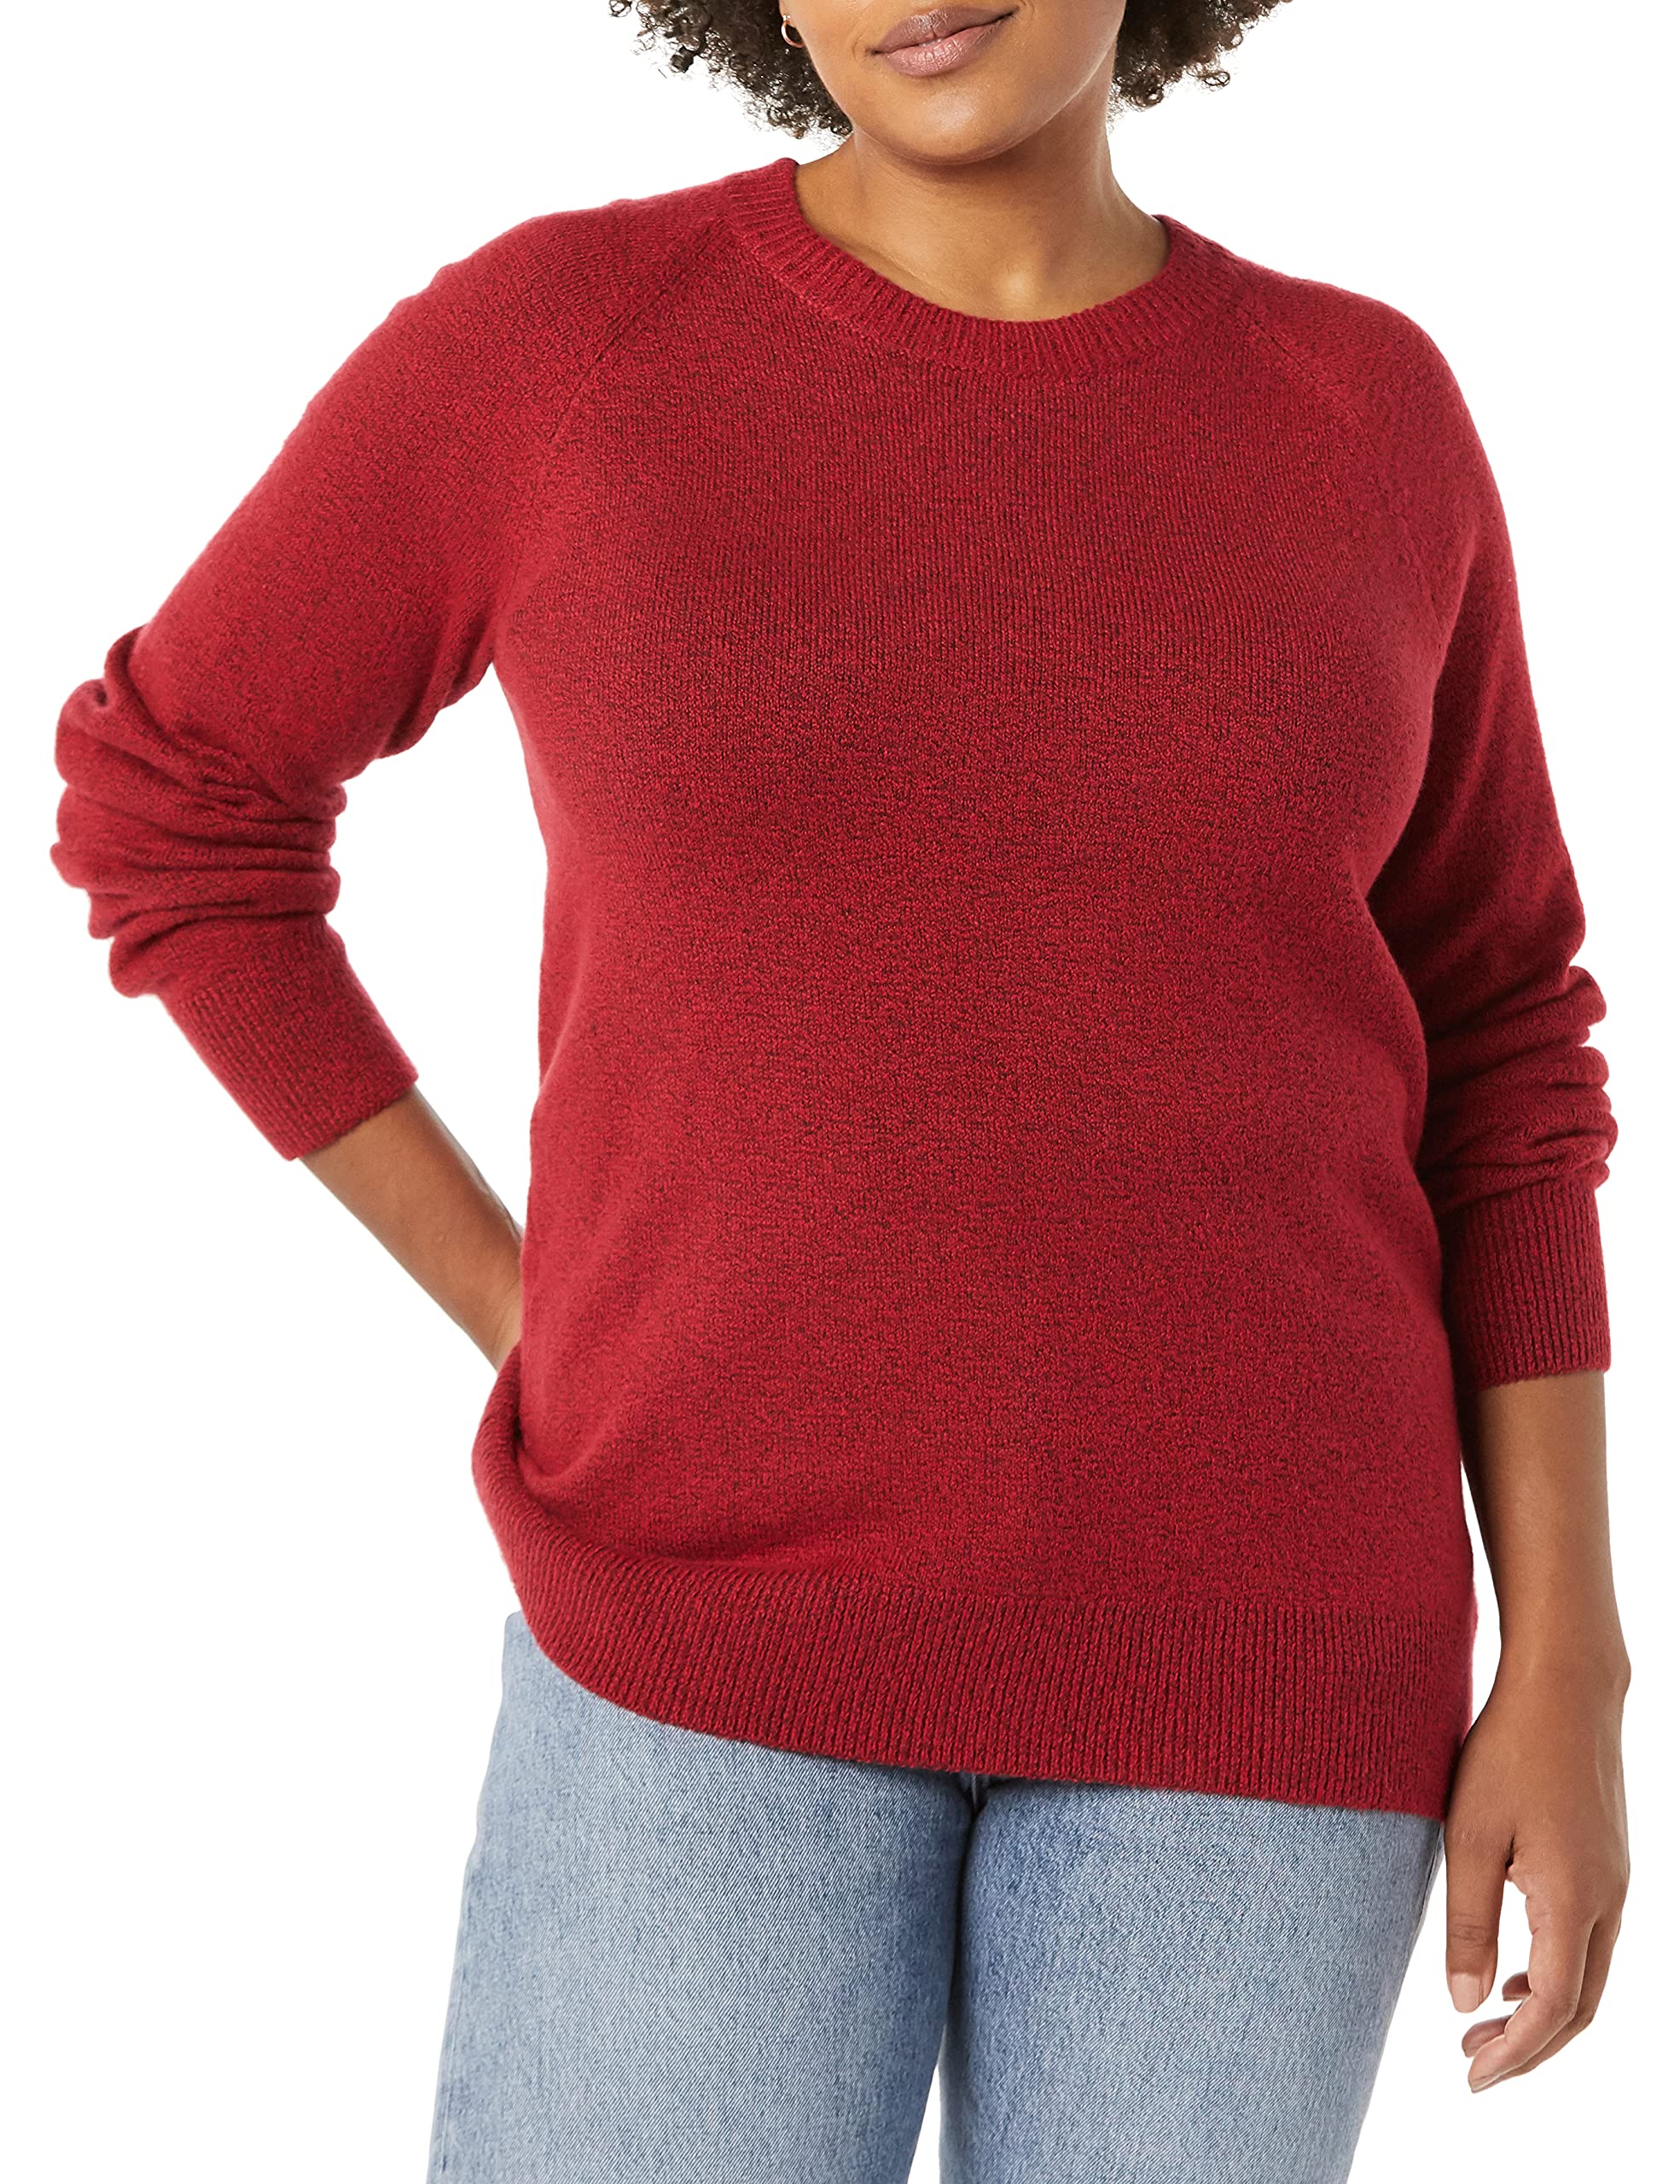 Amazon Essentials Women's Classic-Fit Soft Touch Long-Sleeve Crewneck Sweater (Available in Plus Size)